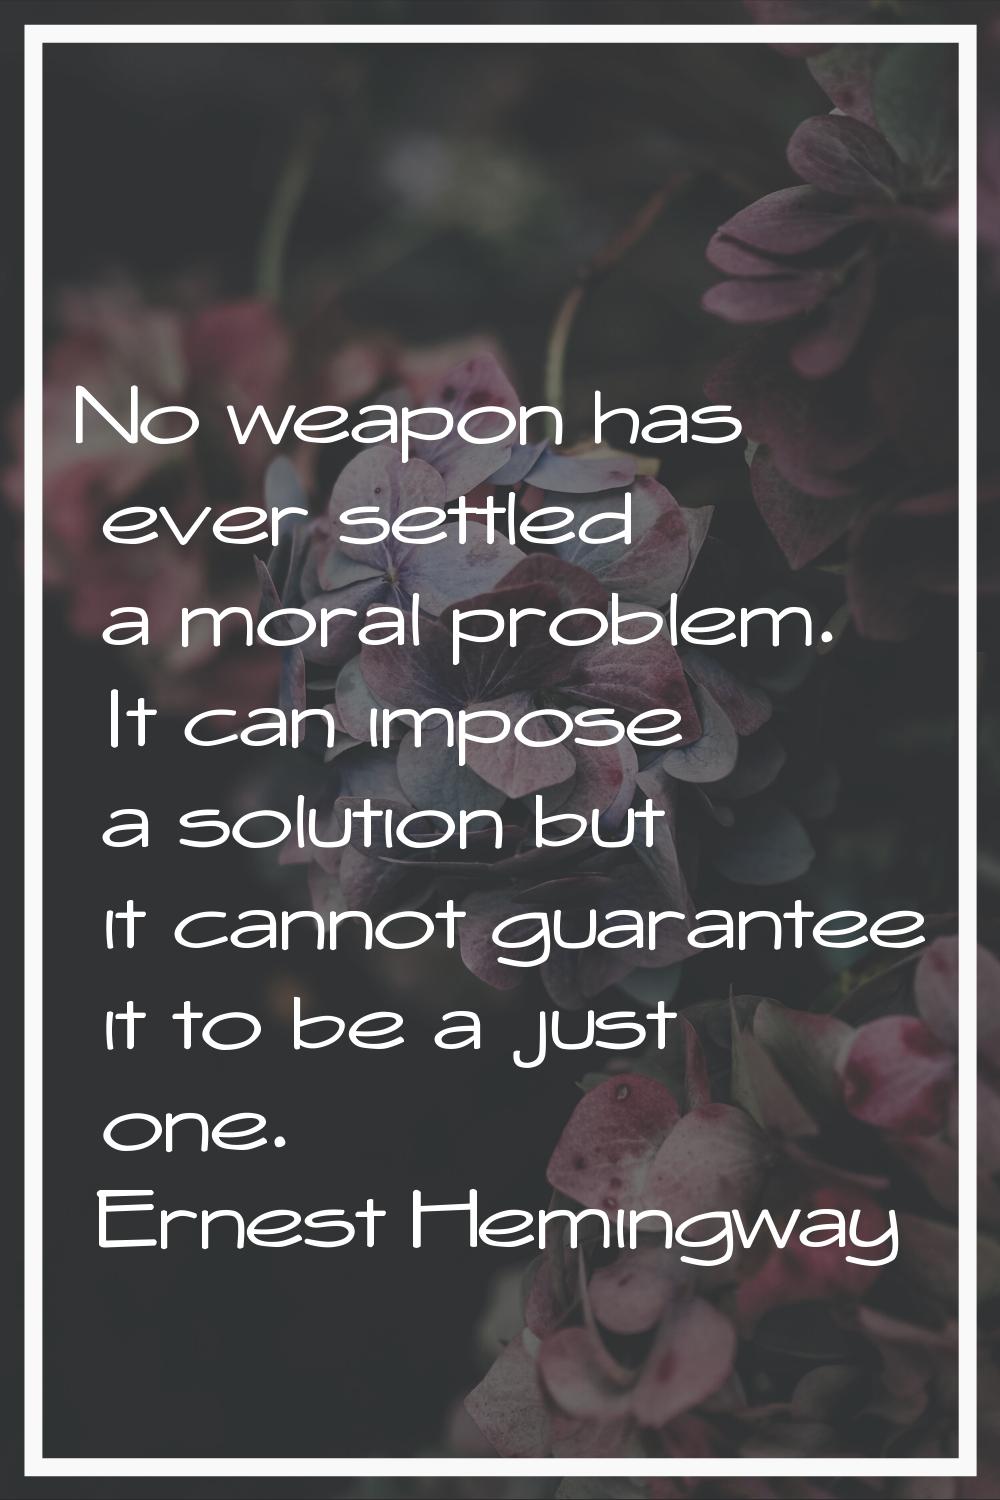 No weapon has ever settled a moral problem. It can impose a solution but it cannot guarantee it to 